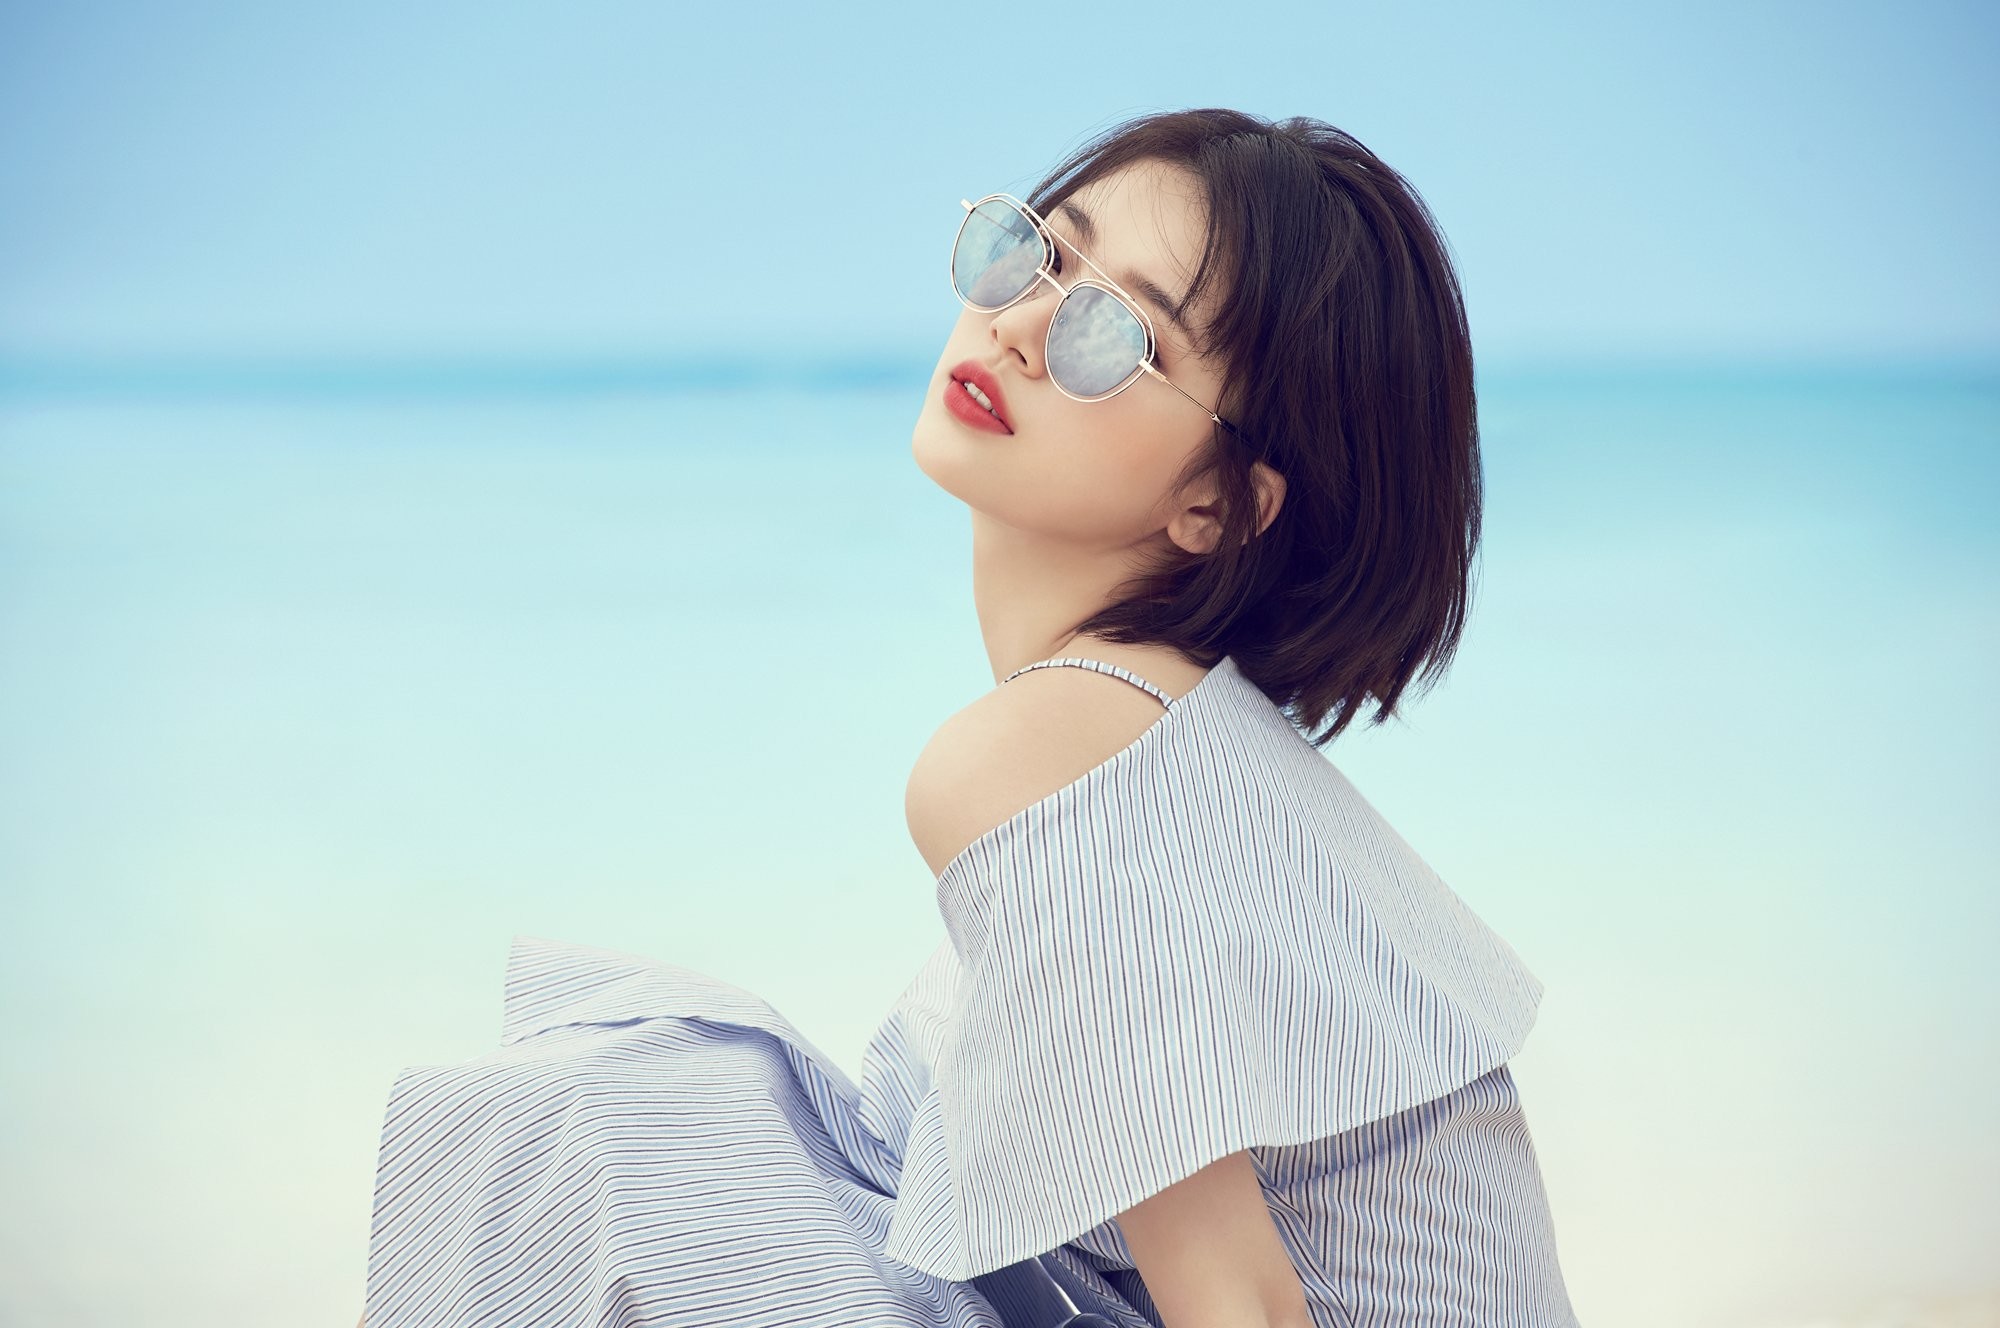 Bae Suzy Wallpapers